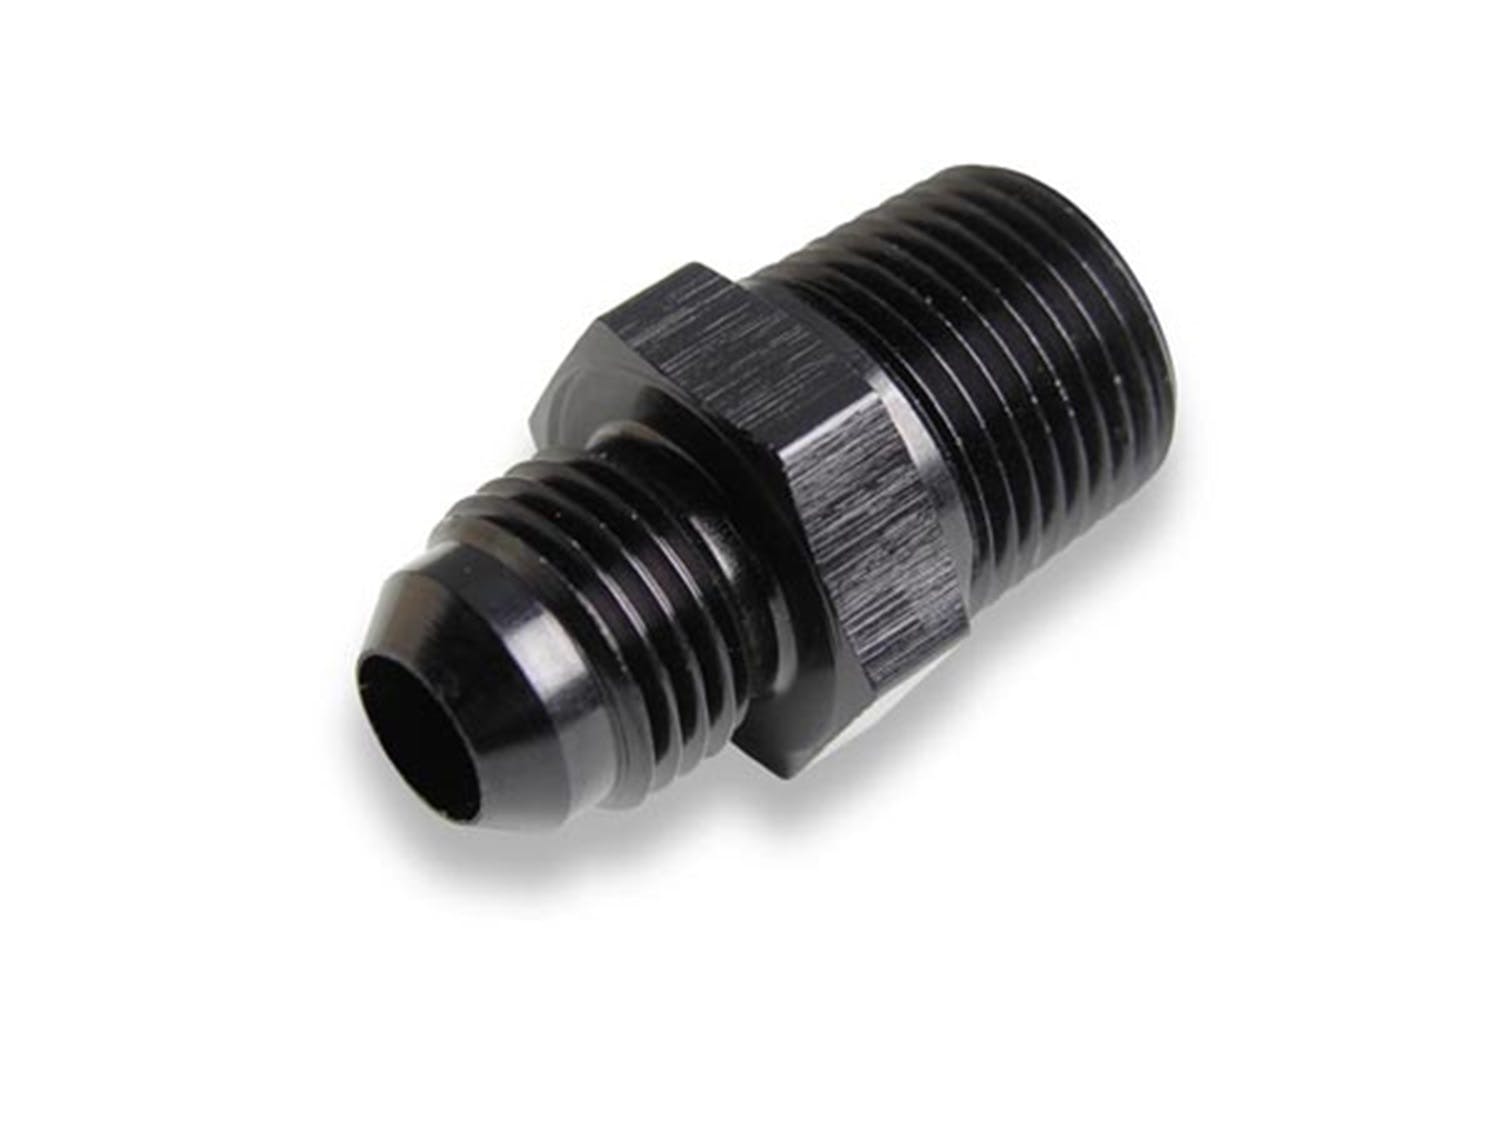 NOS 17989NOS -6AN TO 1/8 NPT ADAPTER, STRAIGHT, BLACK